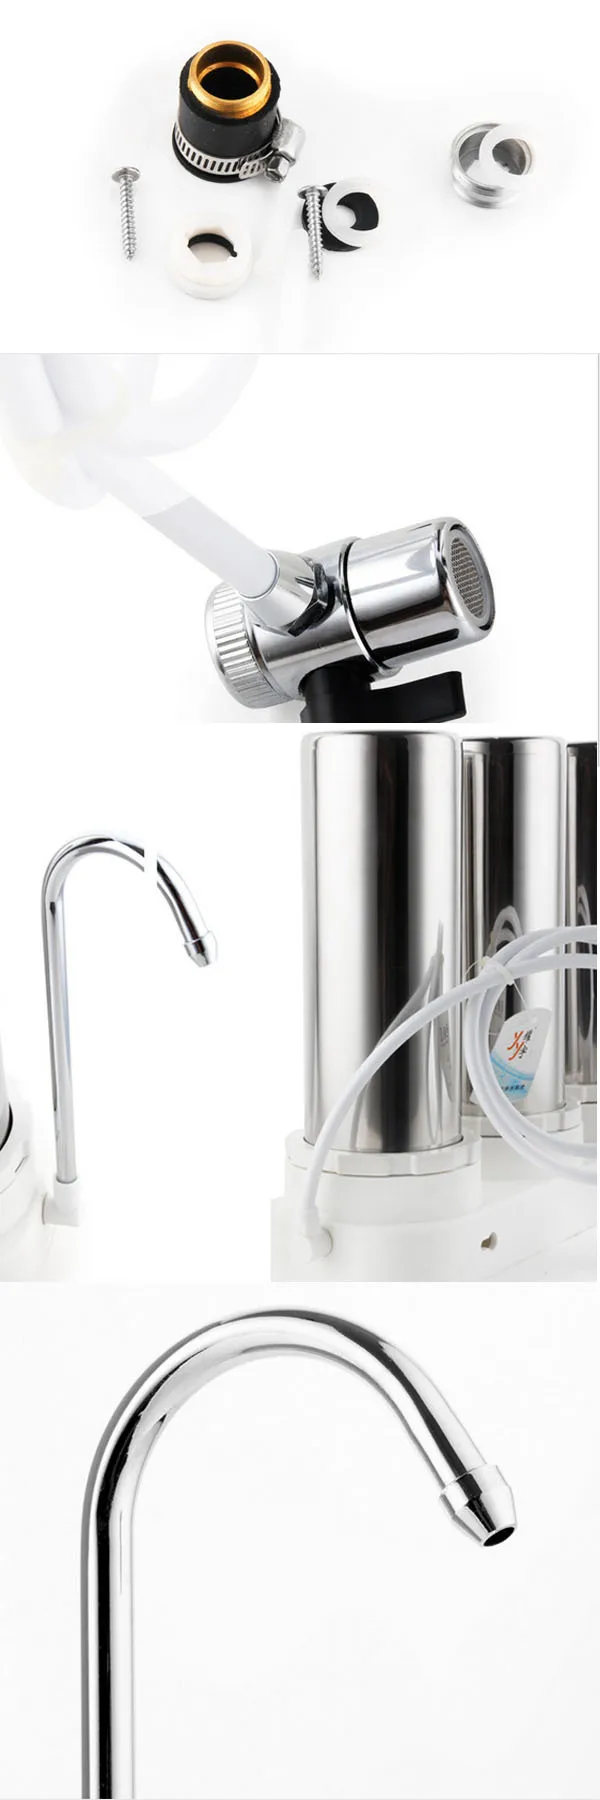 Eco-friendly household water purifier new design water purifier